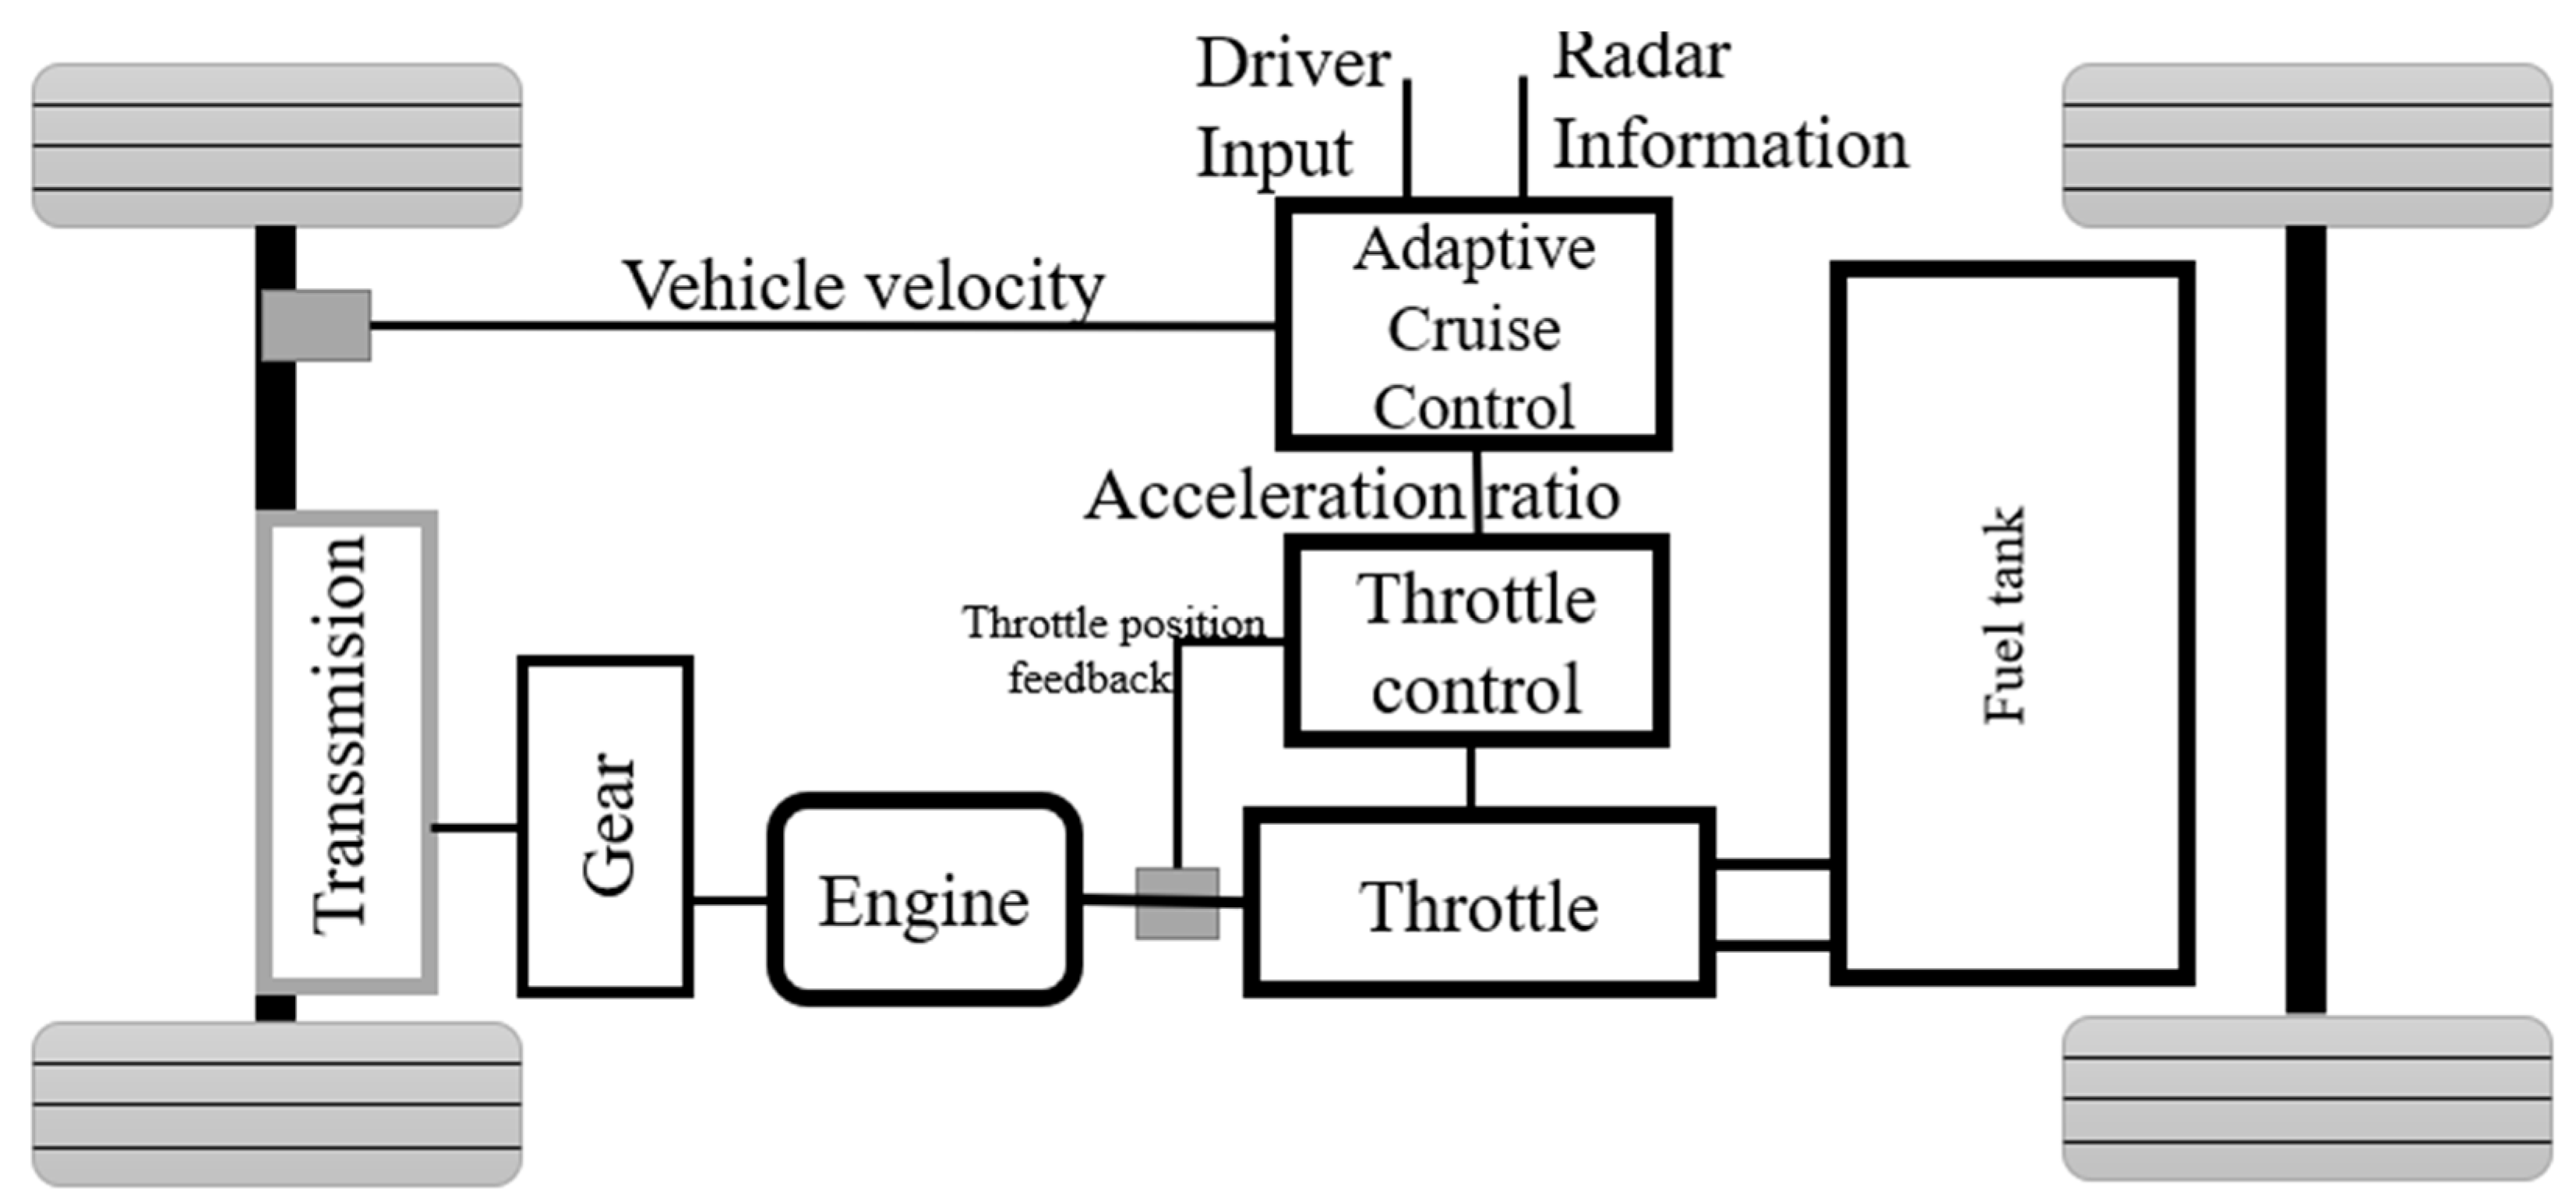 Benefits of Adaptive Cruise Control in EVs